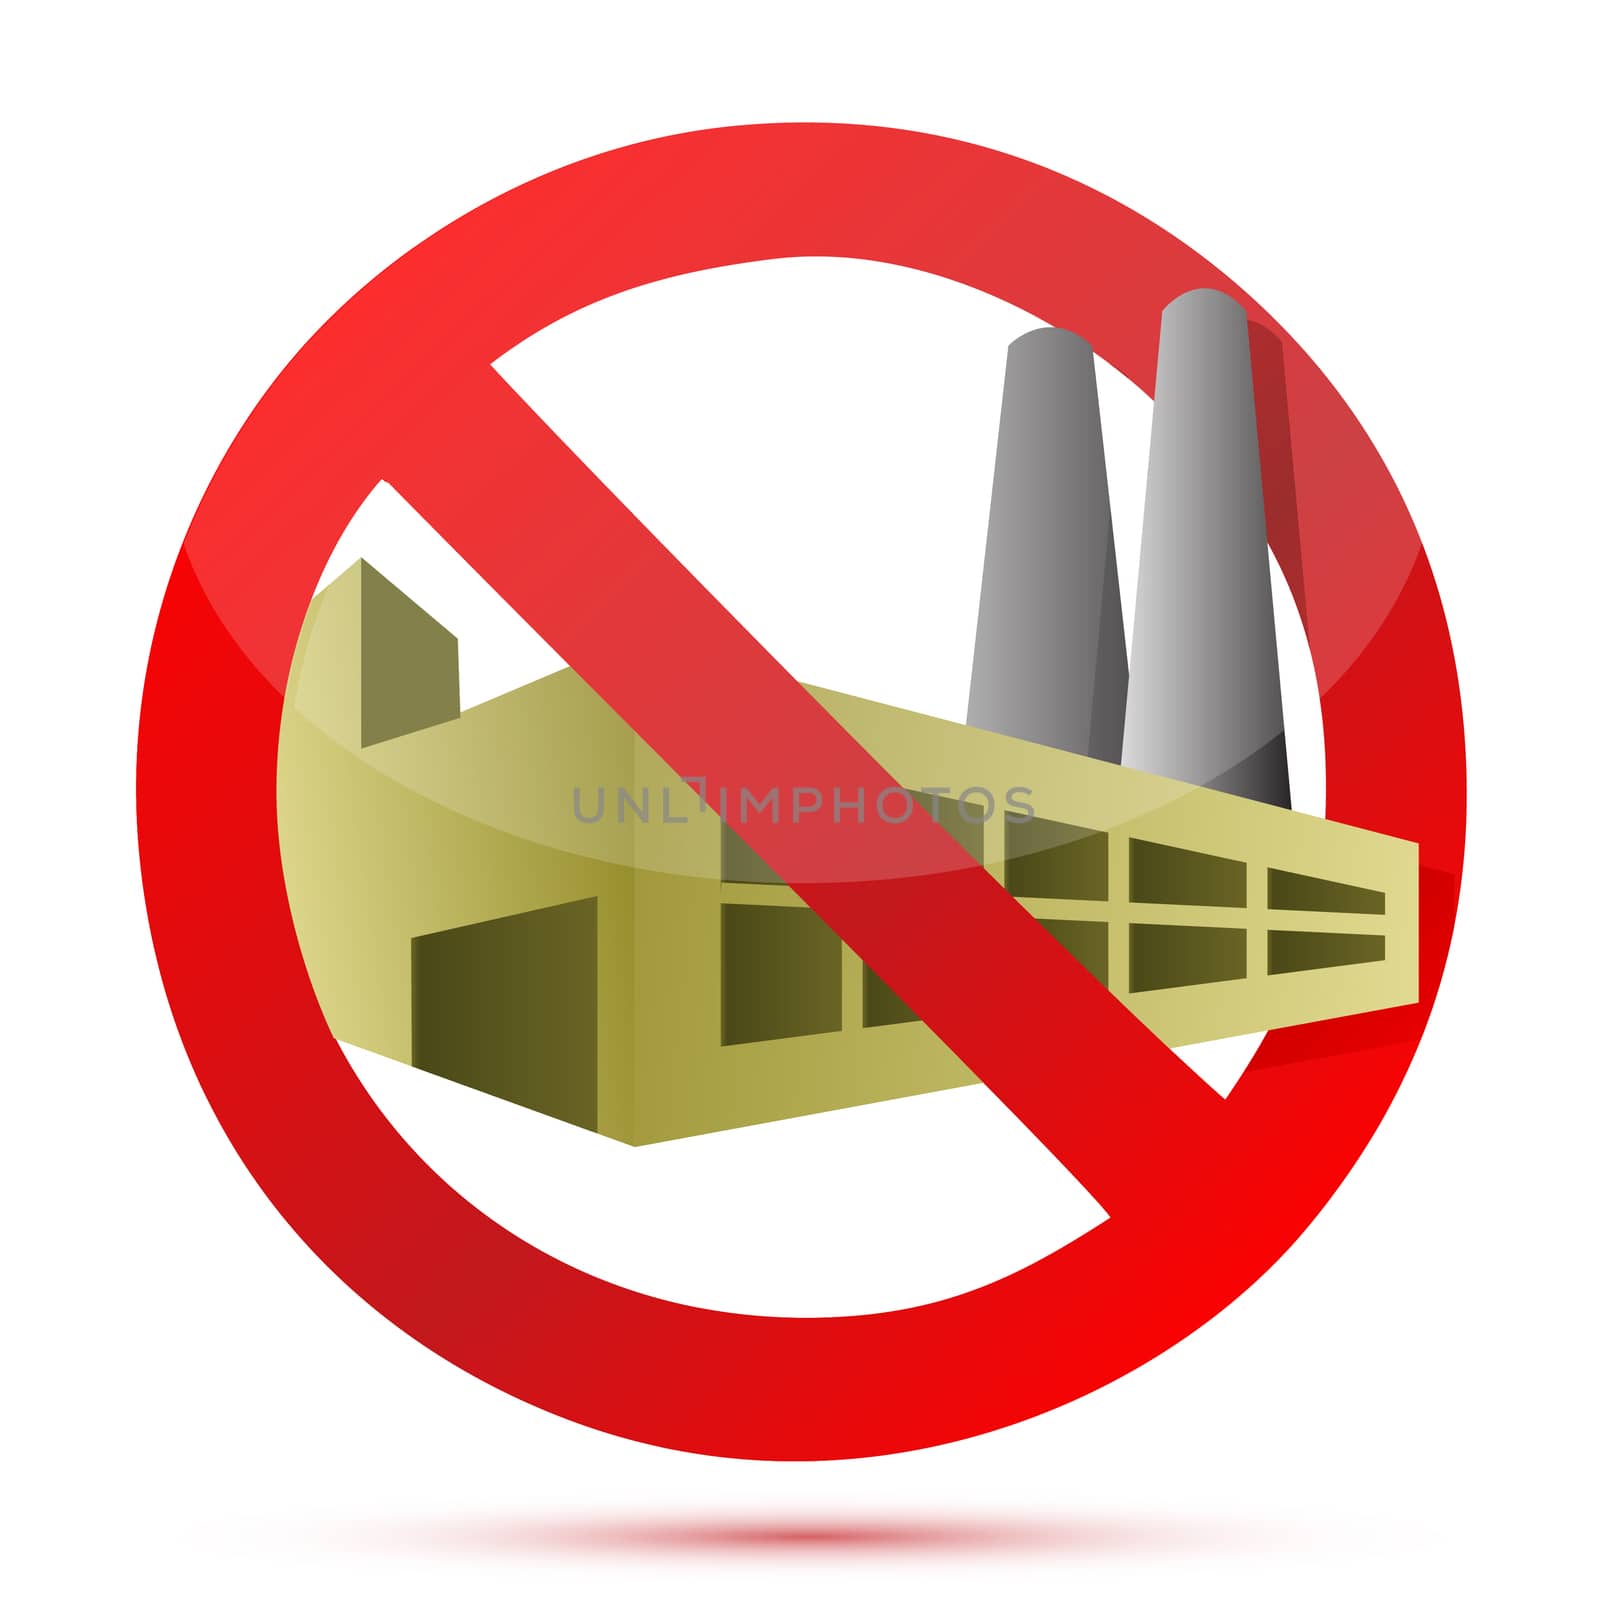 factory forbidden sign illustration design over white background by alexmillos